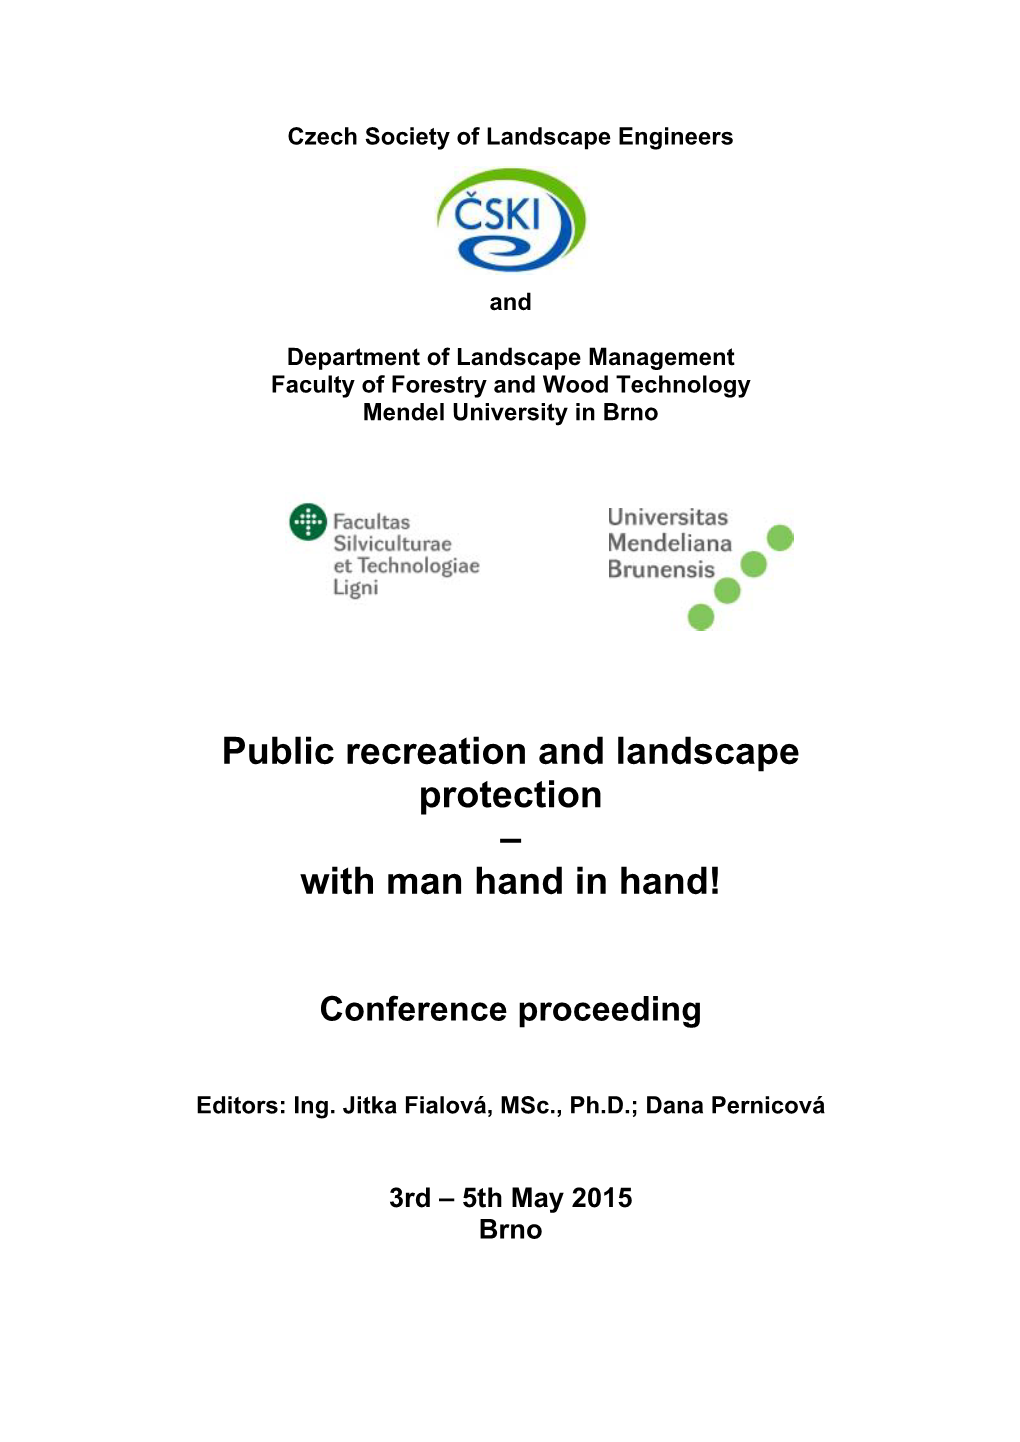 Public Recreation and Landscape Protection – with Man Hand in Hand!